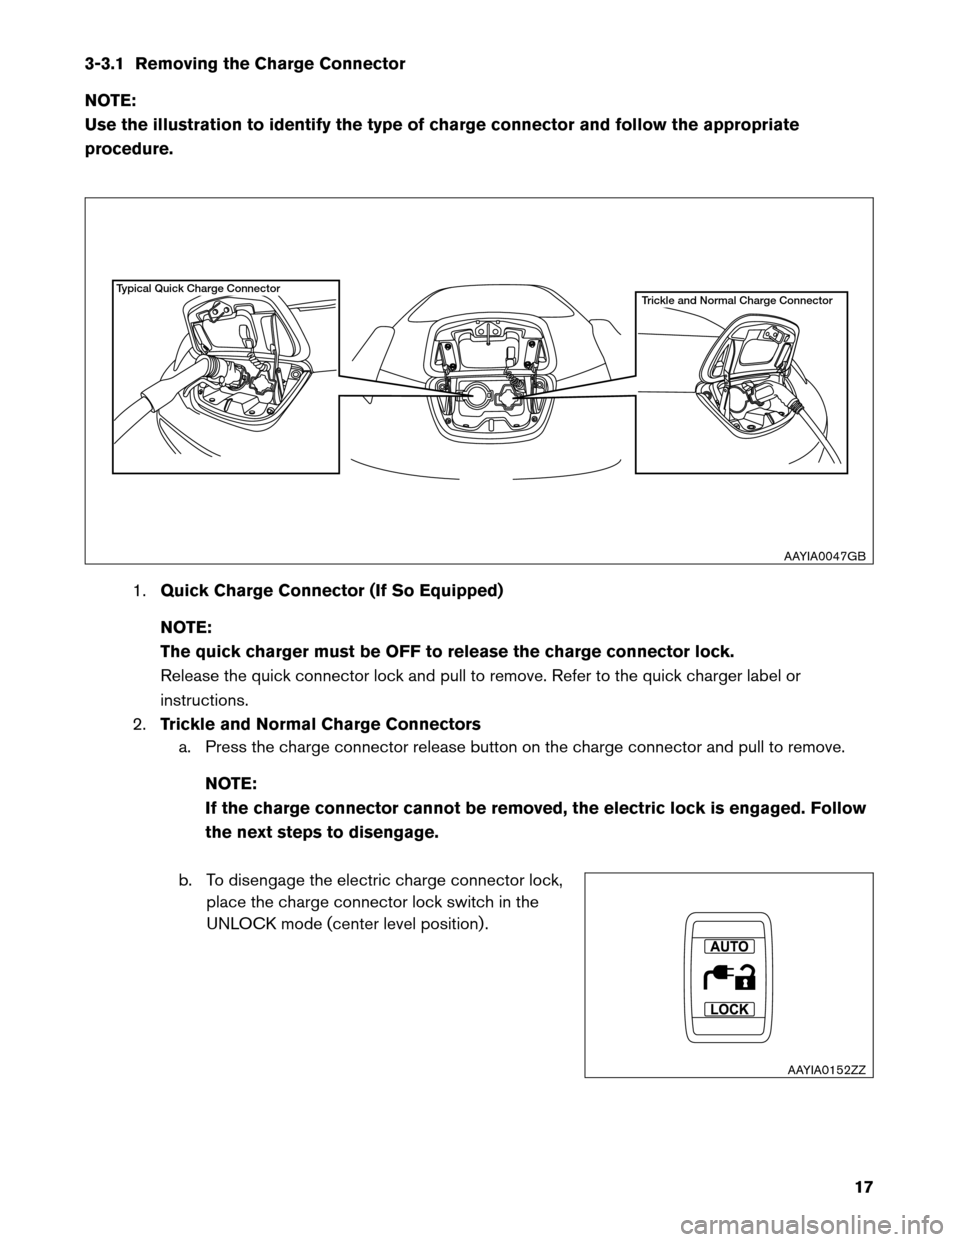 NISSAN LEAF 2013 1.G Dismantling Guide 3-3.1 Removing the Charge Connector
NO
TE:
Use the illustration to identify the type of charge connector and follow the appropriate
procedure.
1.Quick Charge Connector (If So Equipped)
NOTE:
The quick